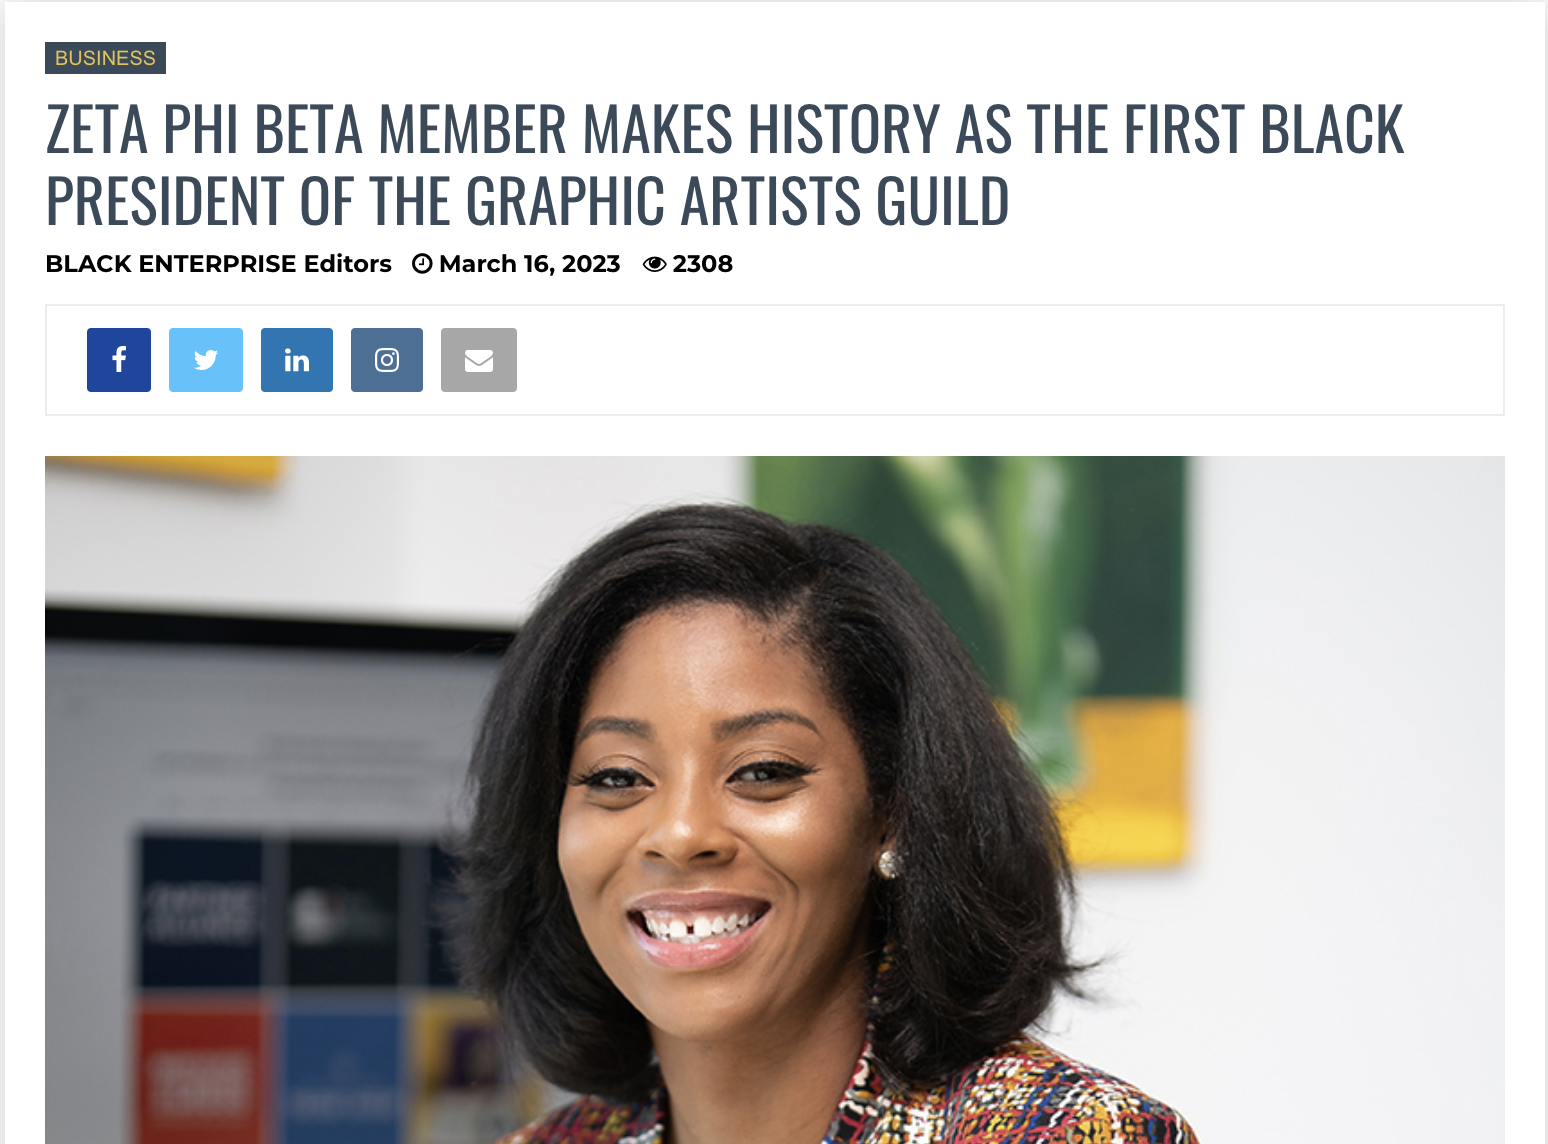 Yanique DaCosta First Black President of the Graphic Artists Guild